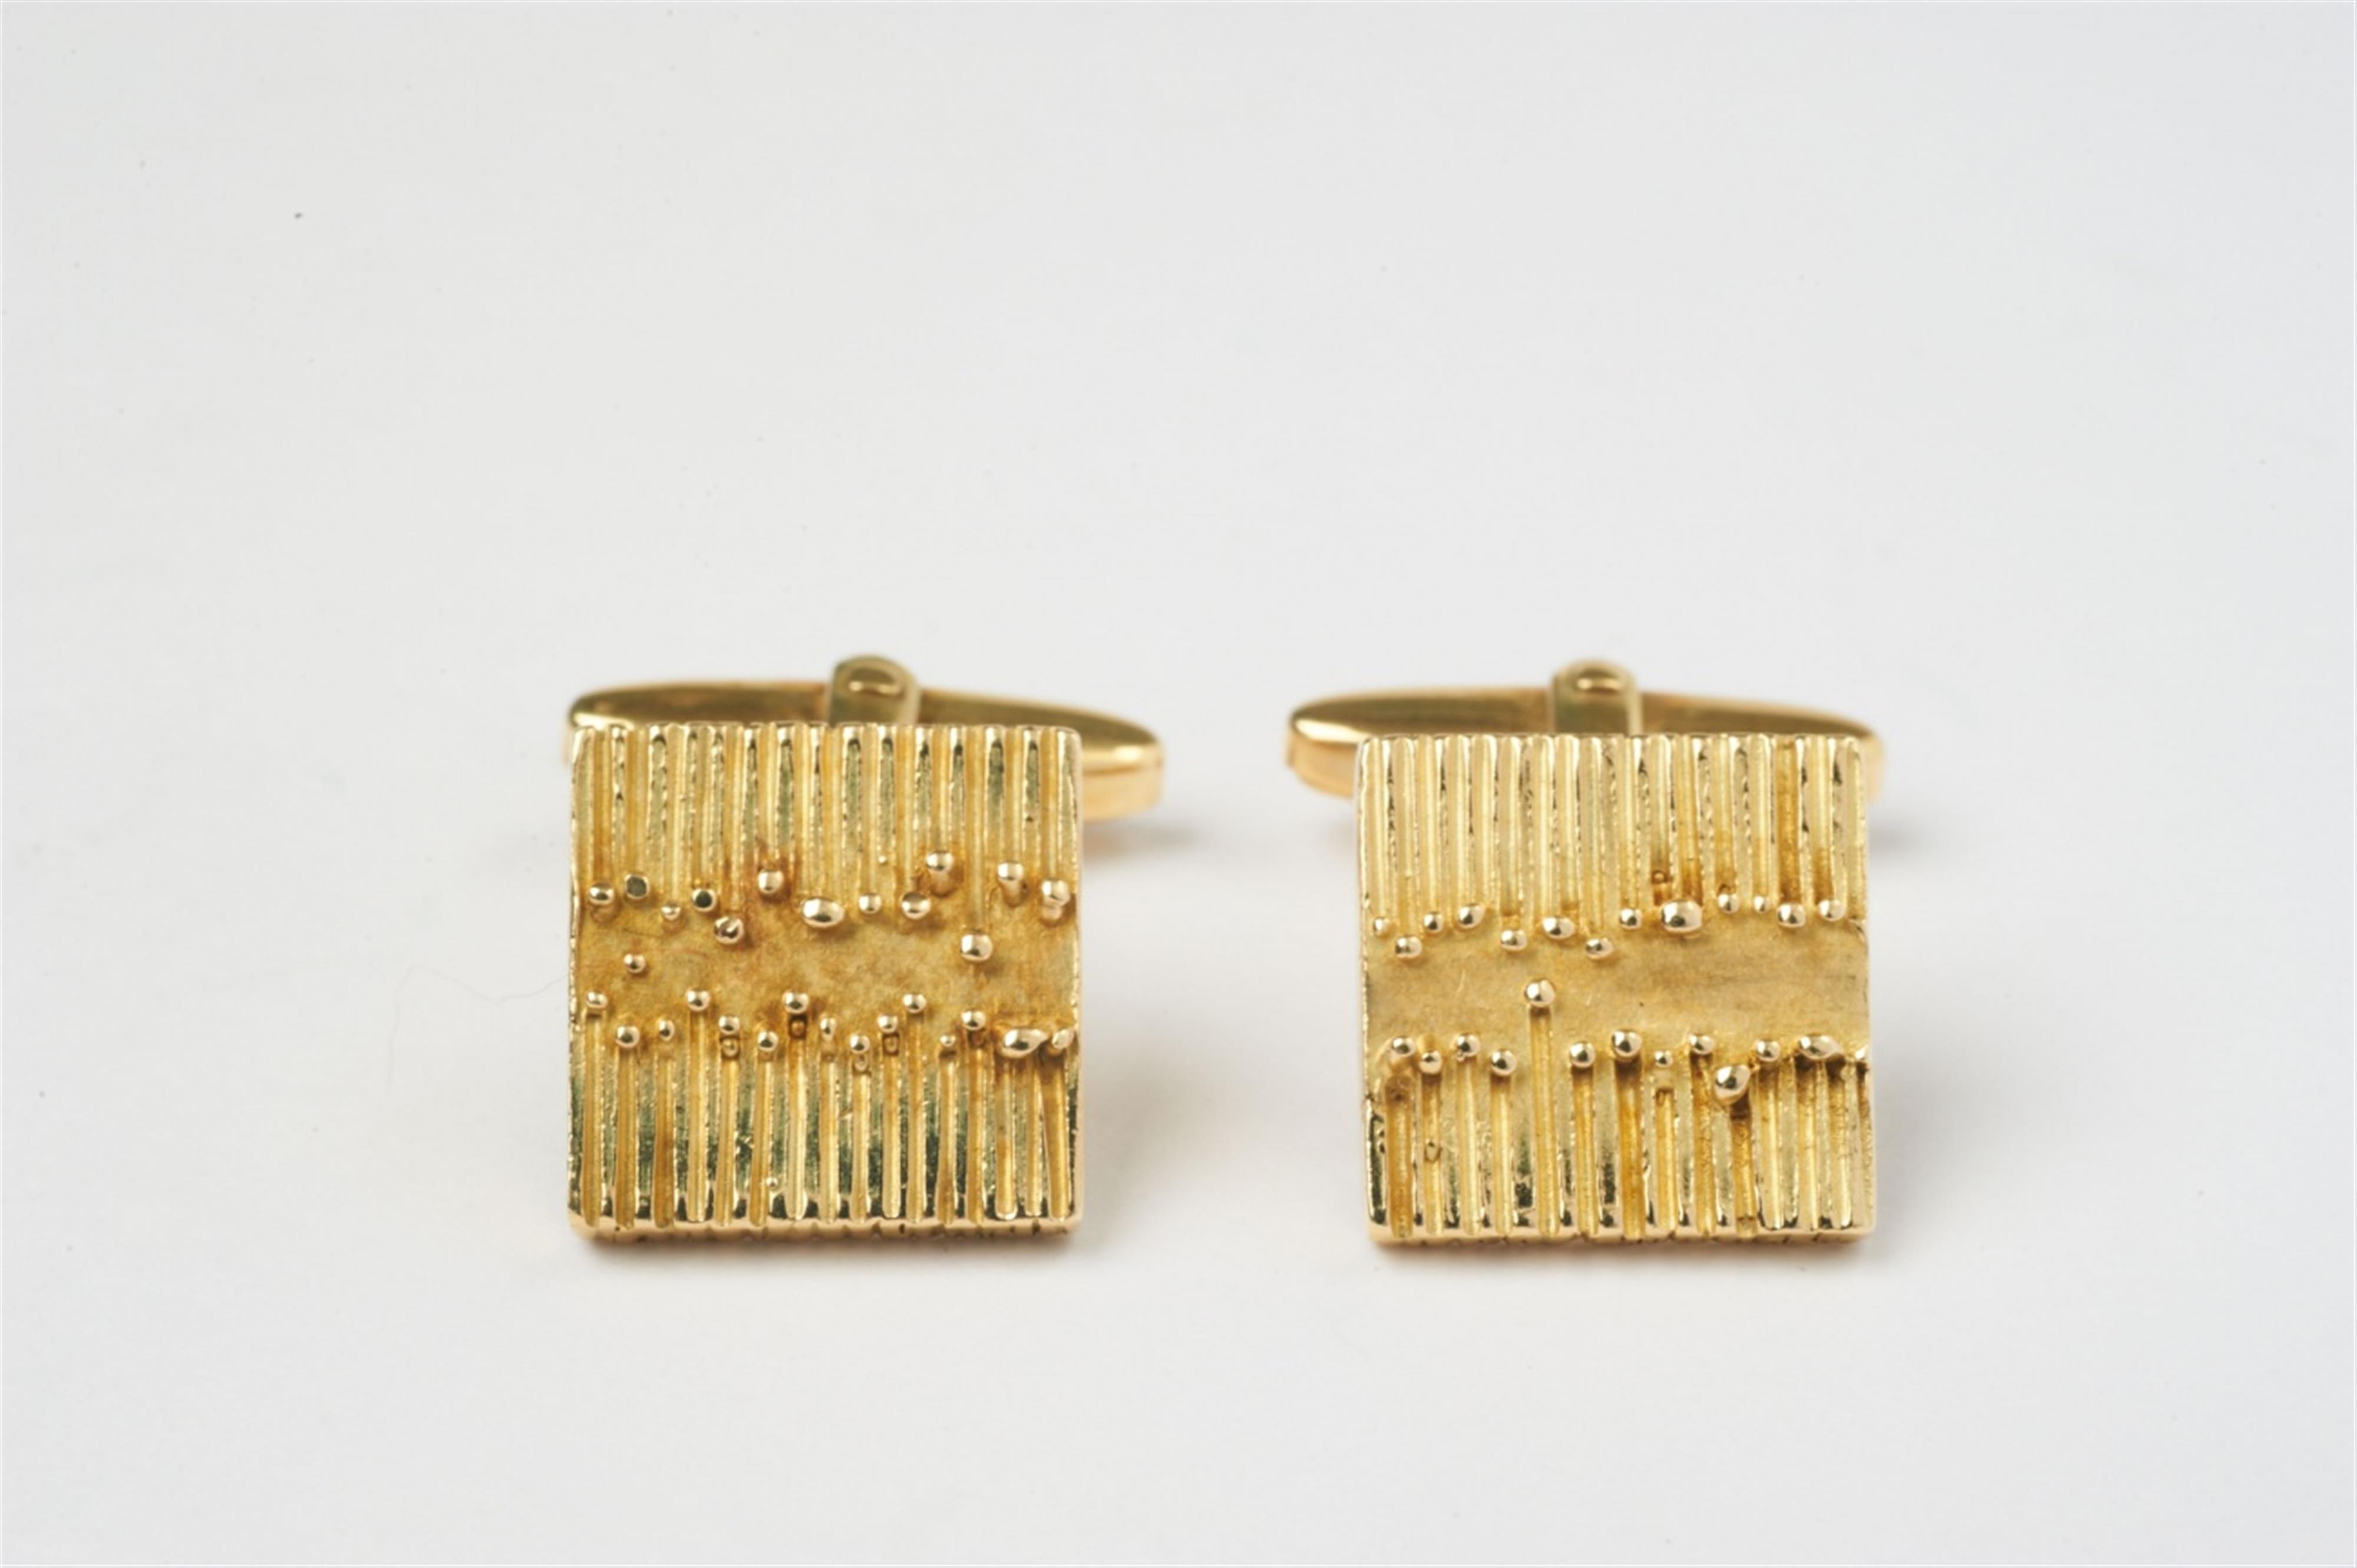 A pair of 18k gold cufflinks with relief decor by John & Ursula Parry - image-1